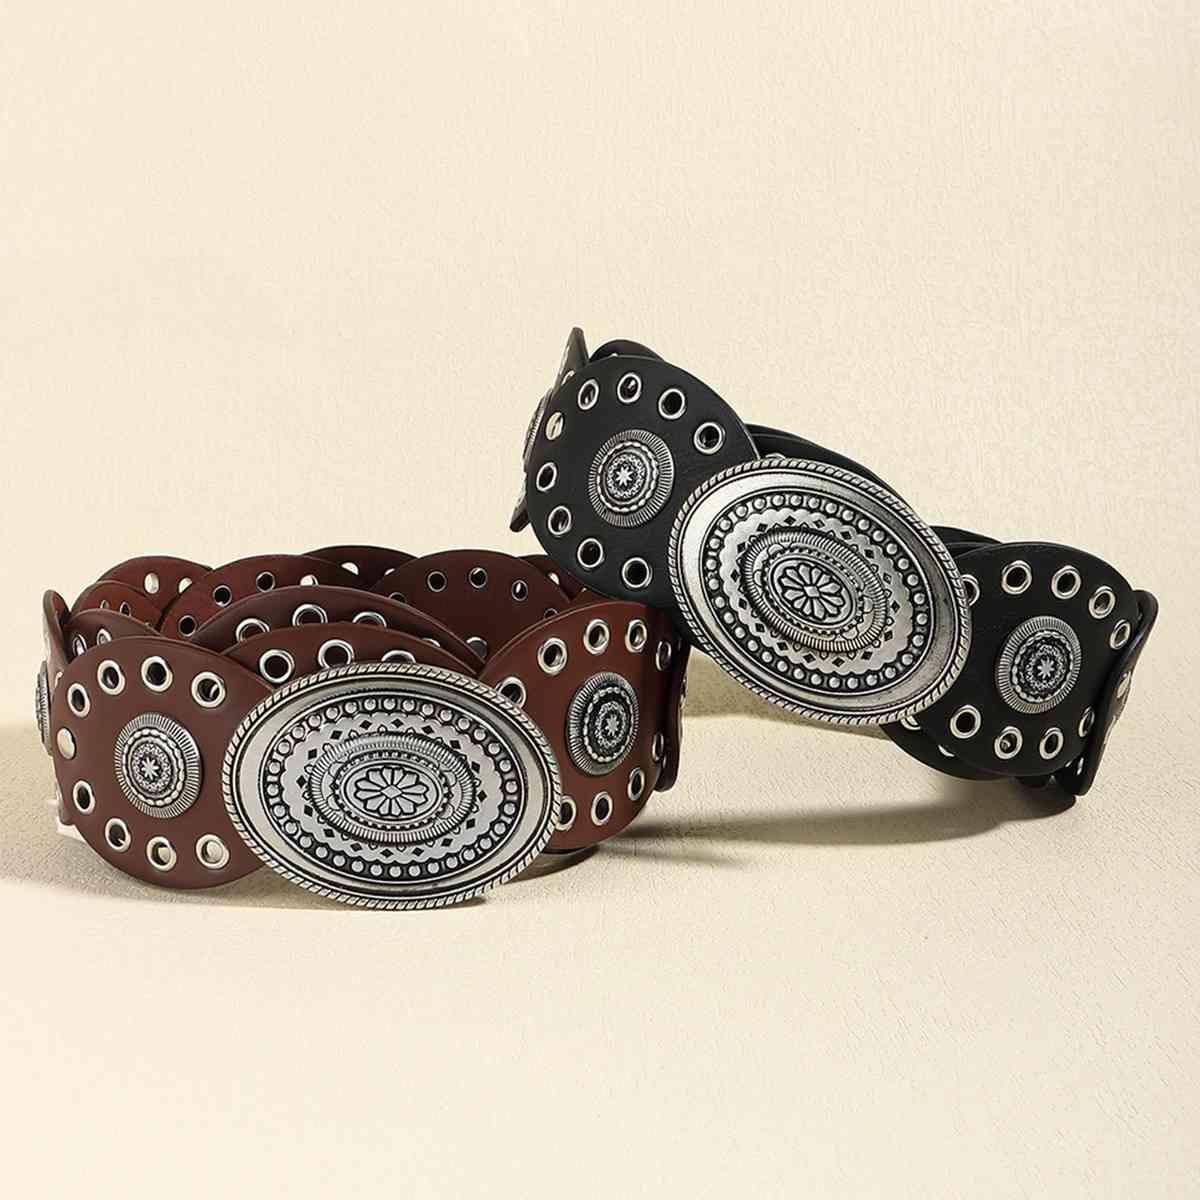 The Oval Concho Belt